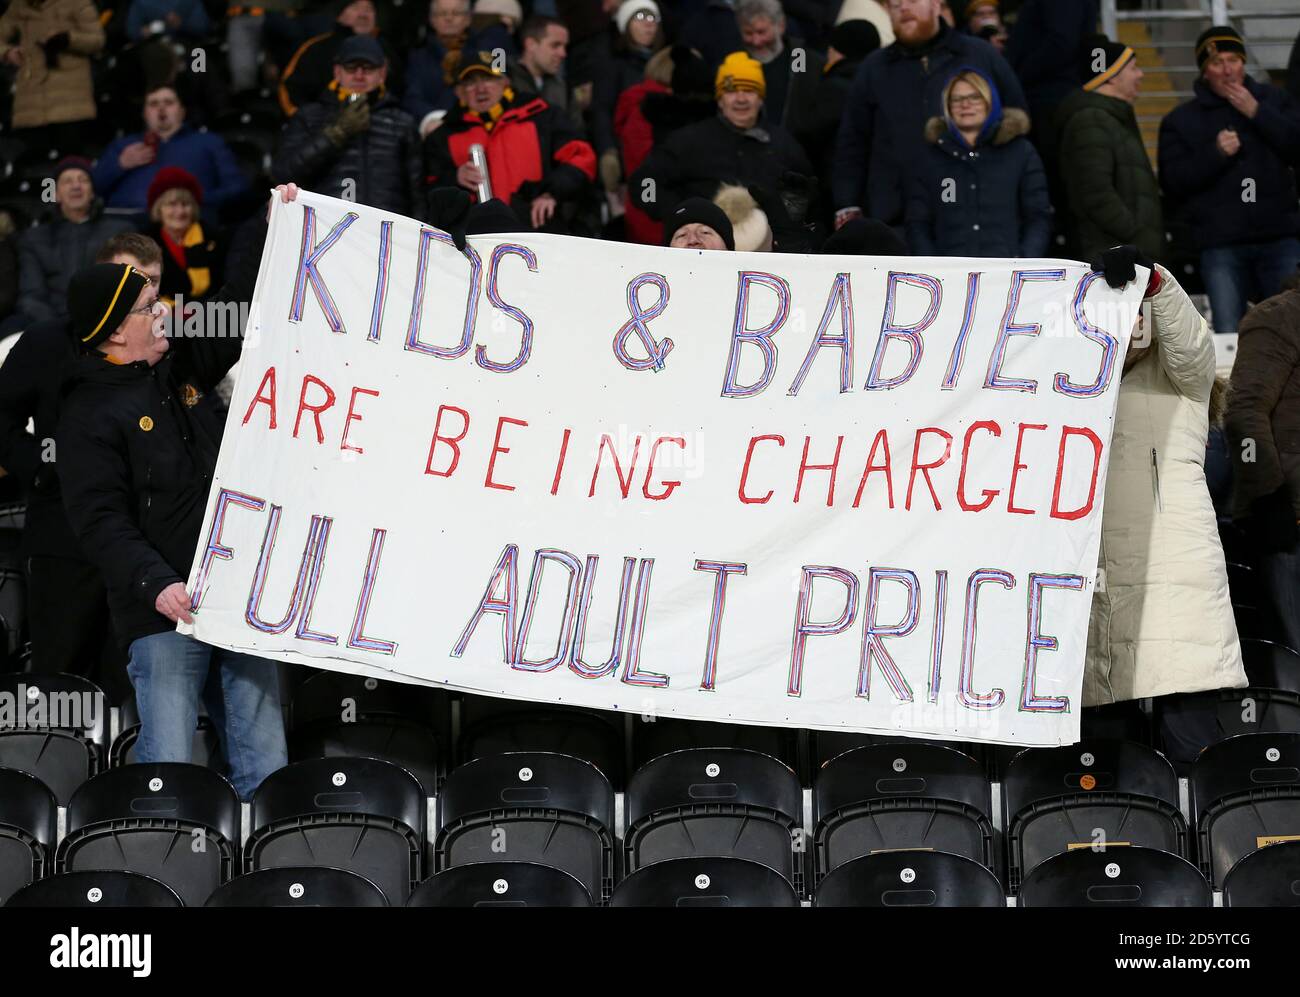 A protest by Hull City fans in the stands against ticket prices Stock Photo